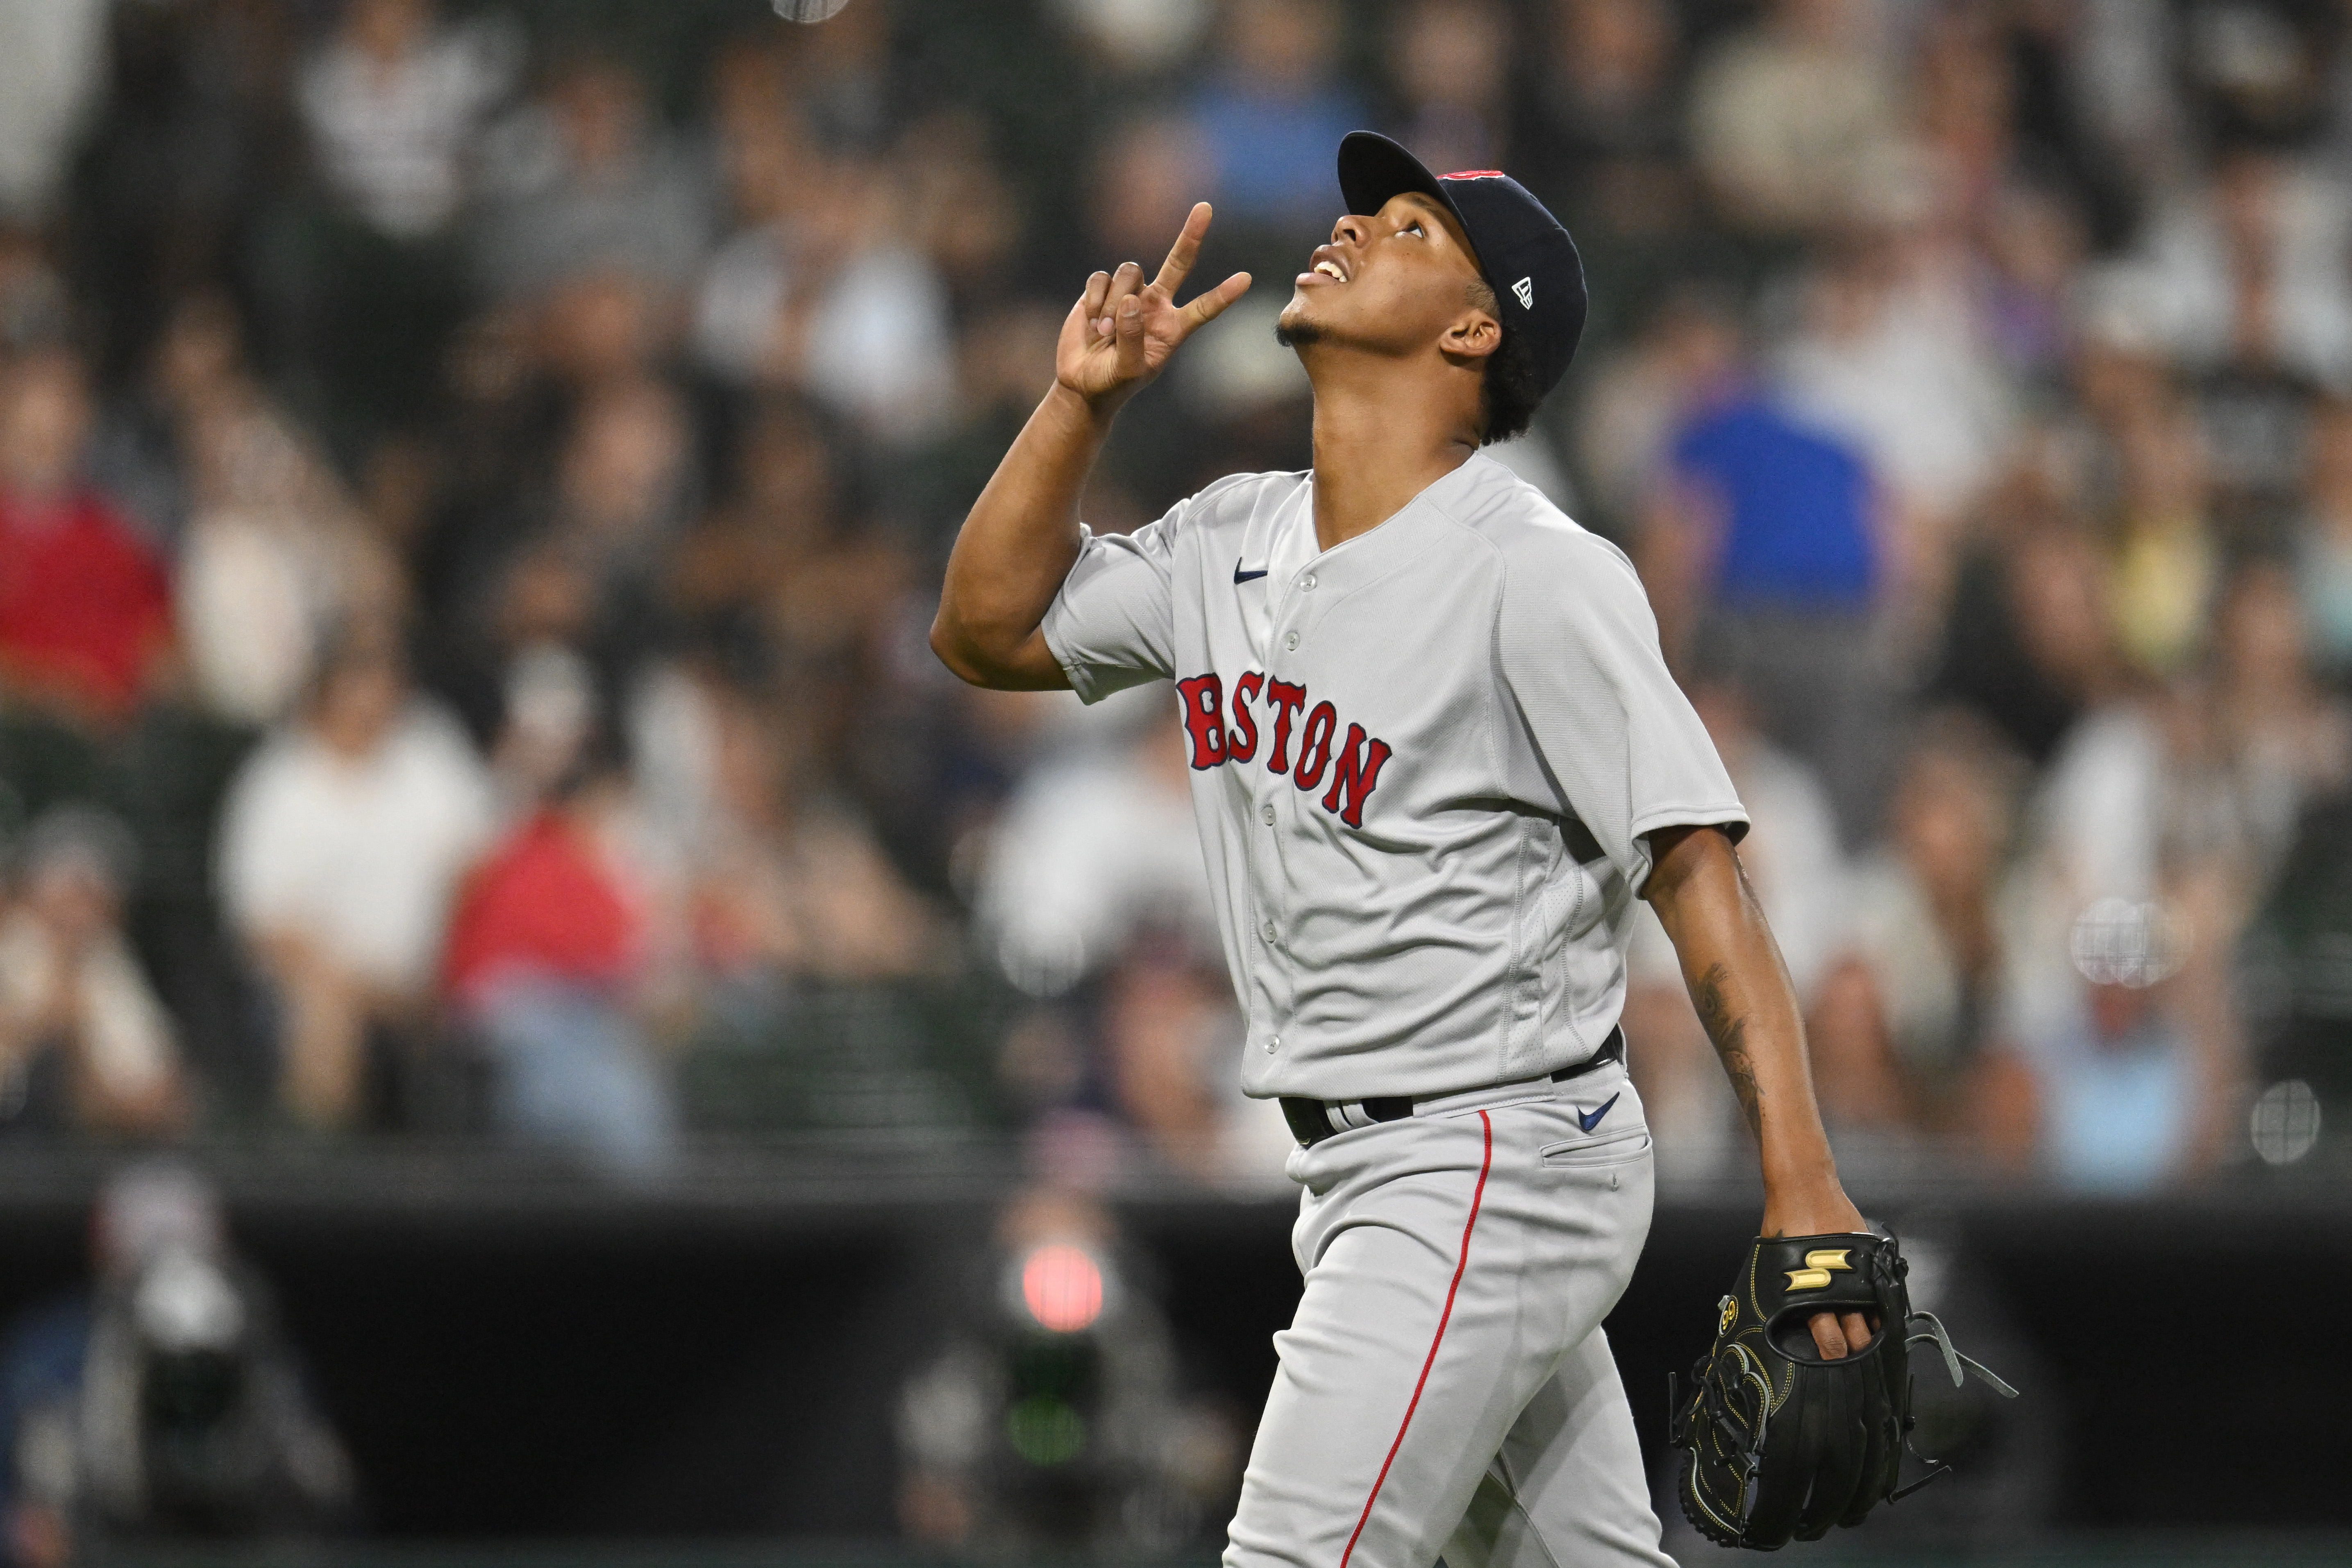 Brayan Bello intends to be an ace, and for these Red Sox, the future is already starting to unfold - The Boston Globe